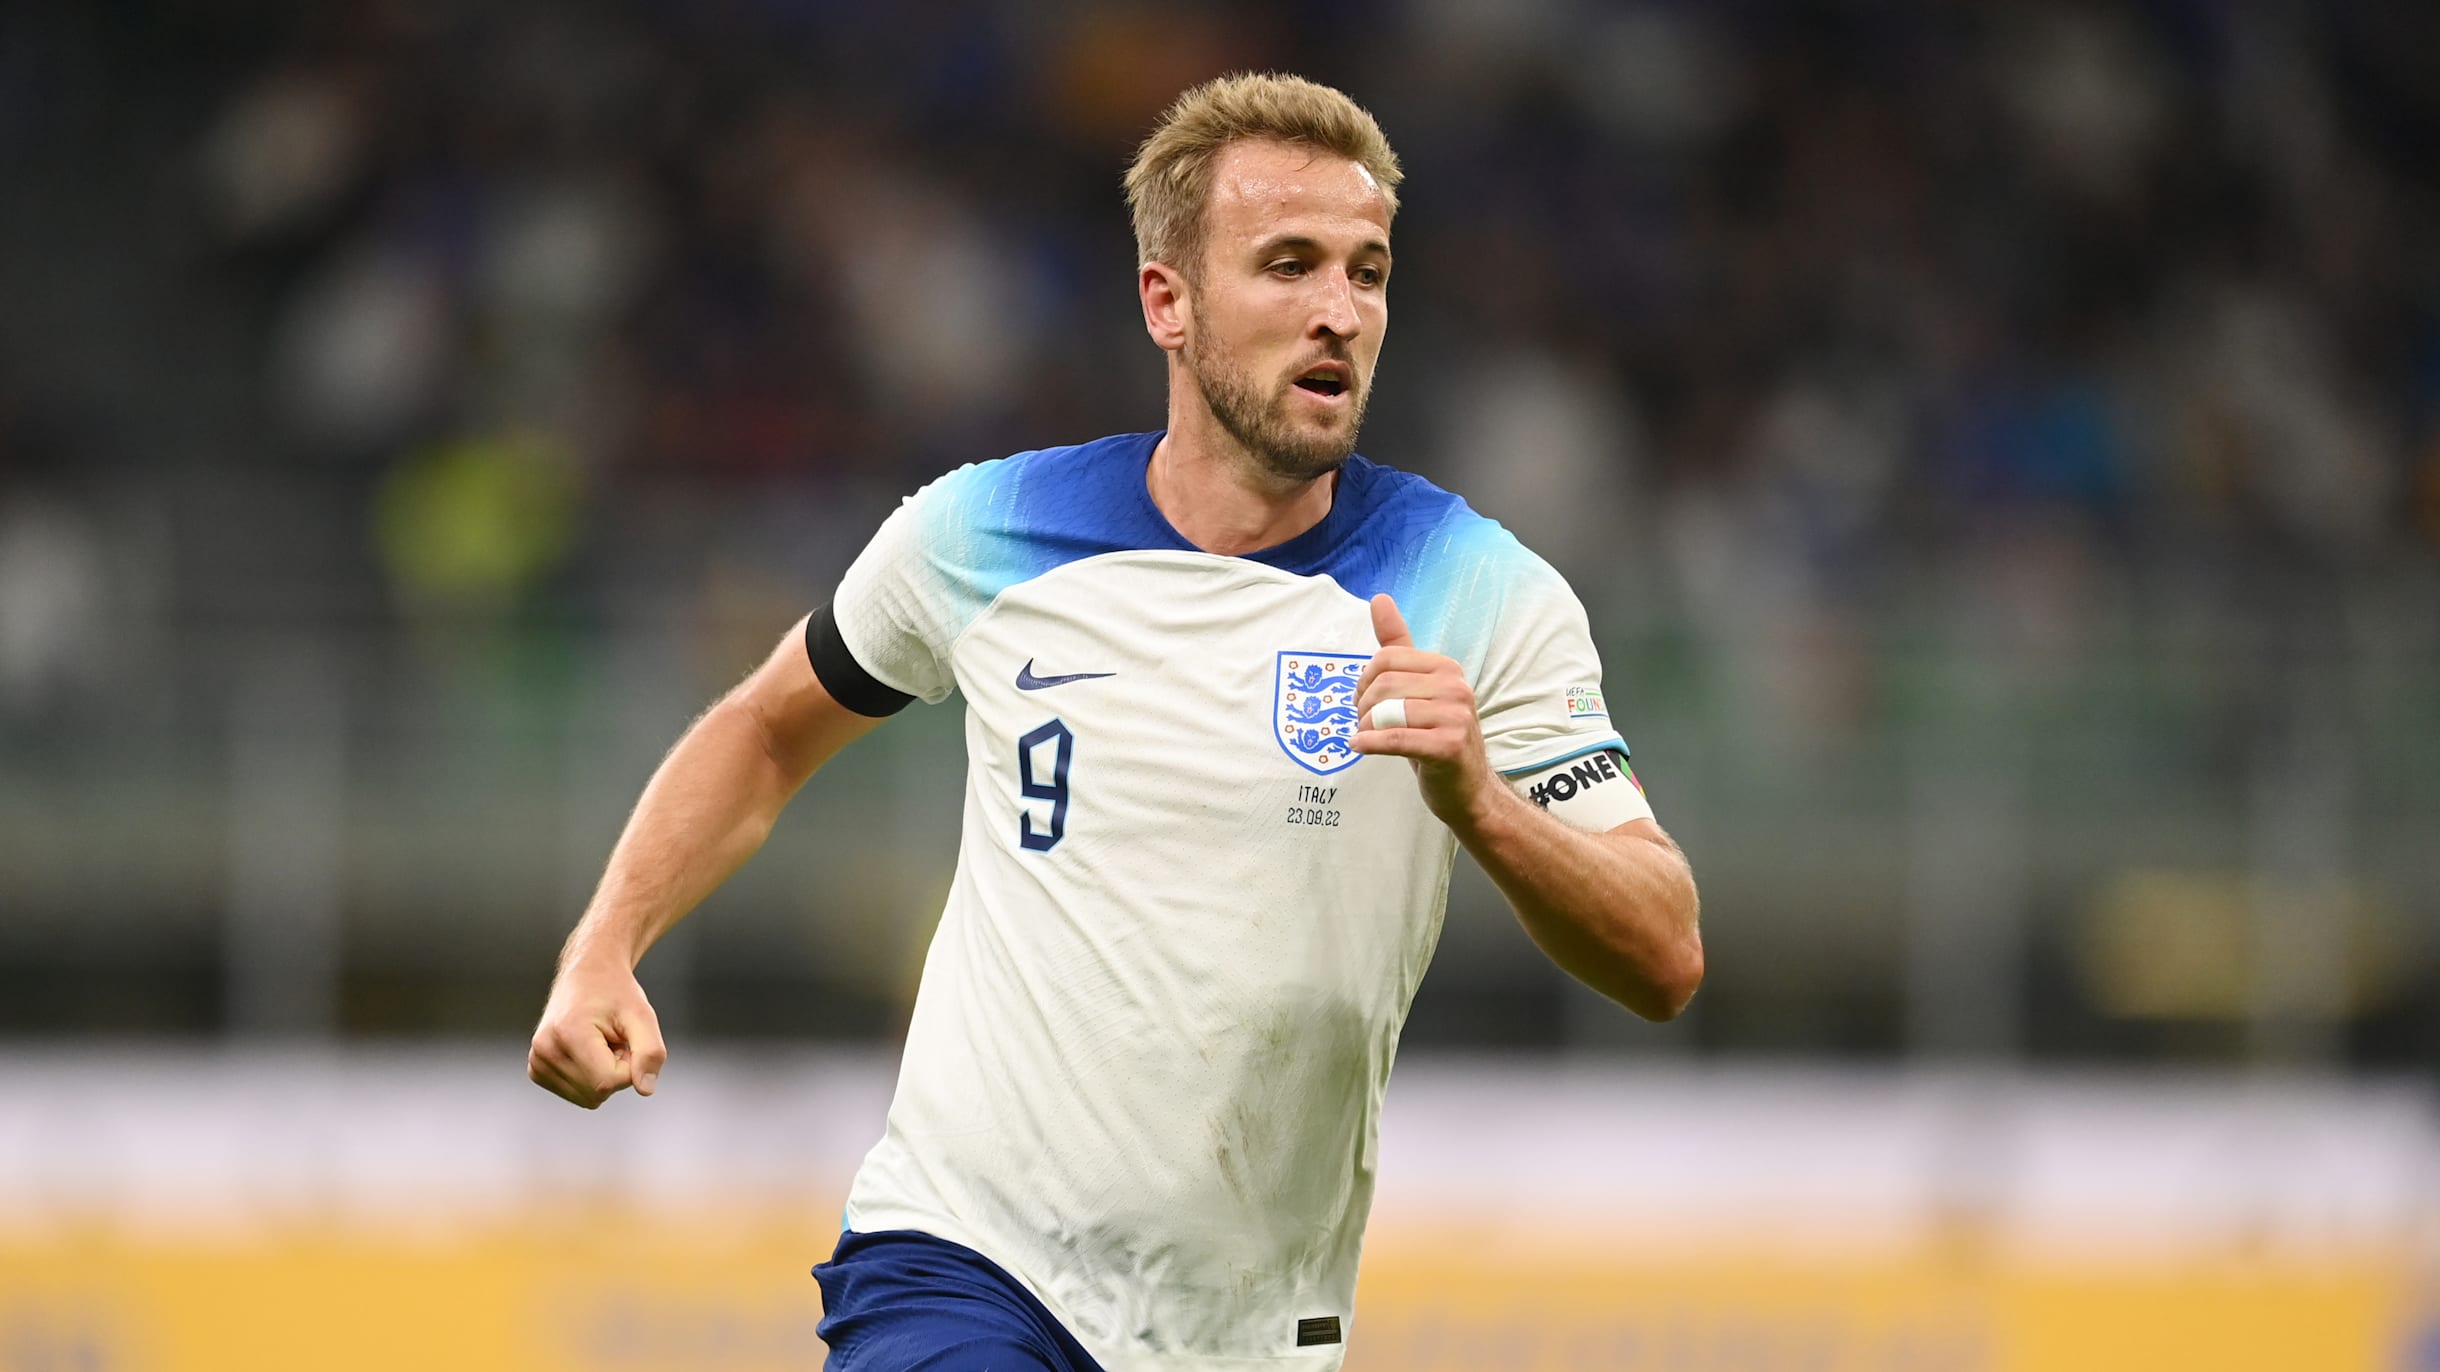 Harry Kane spearheads England challenge at Qatar 2022 FIFA World Cup Full squad and expected team line-up